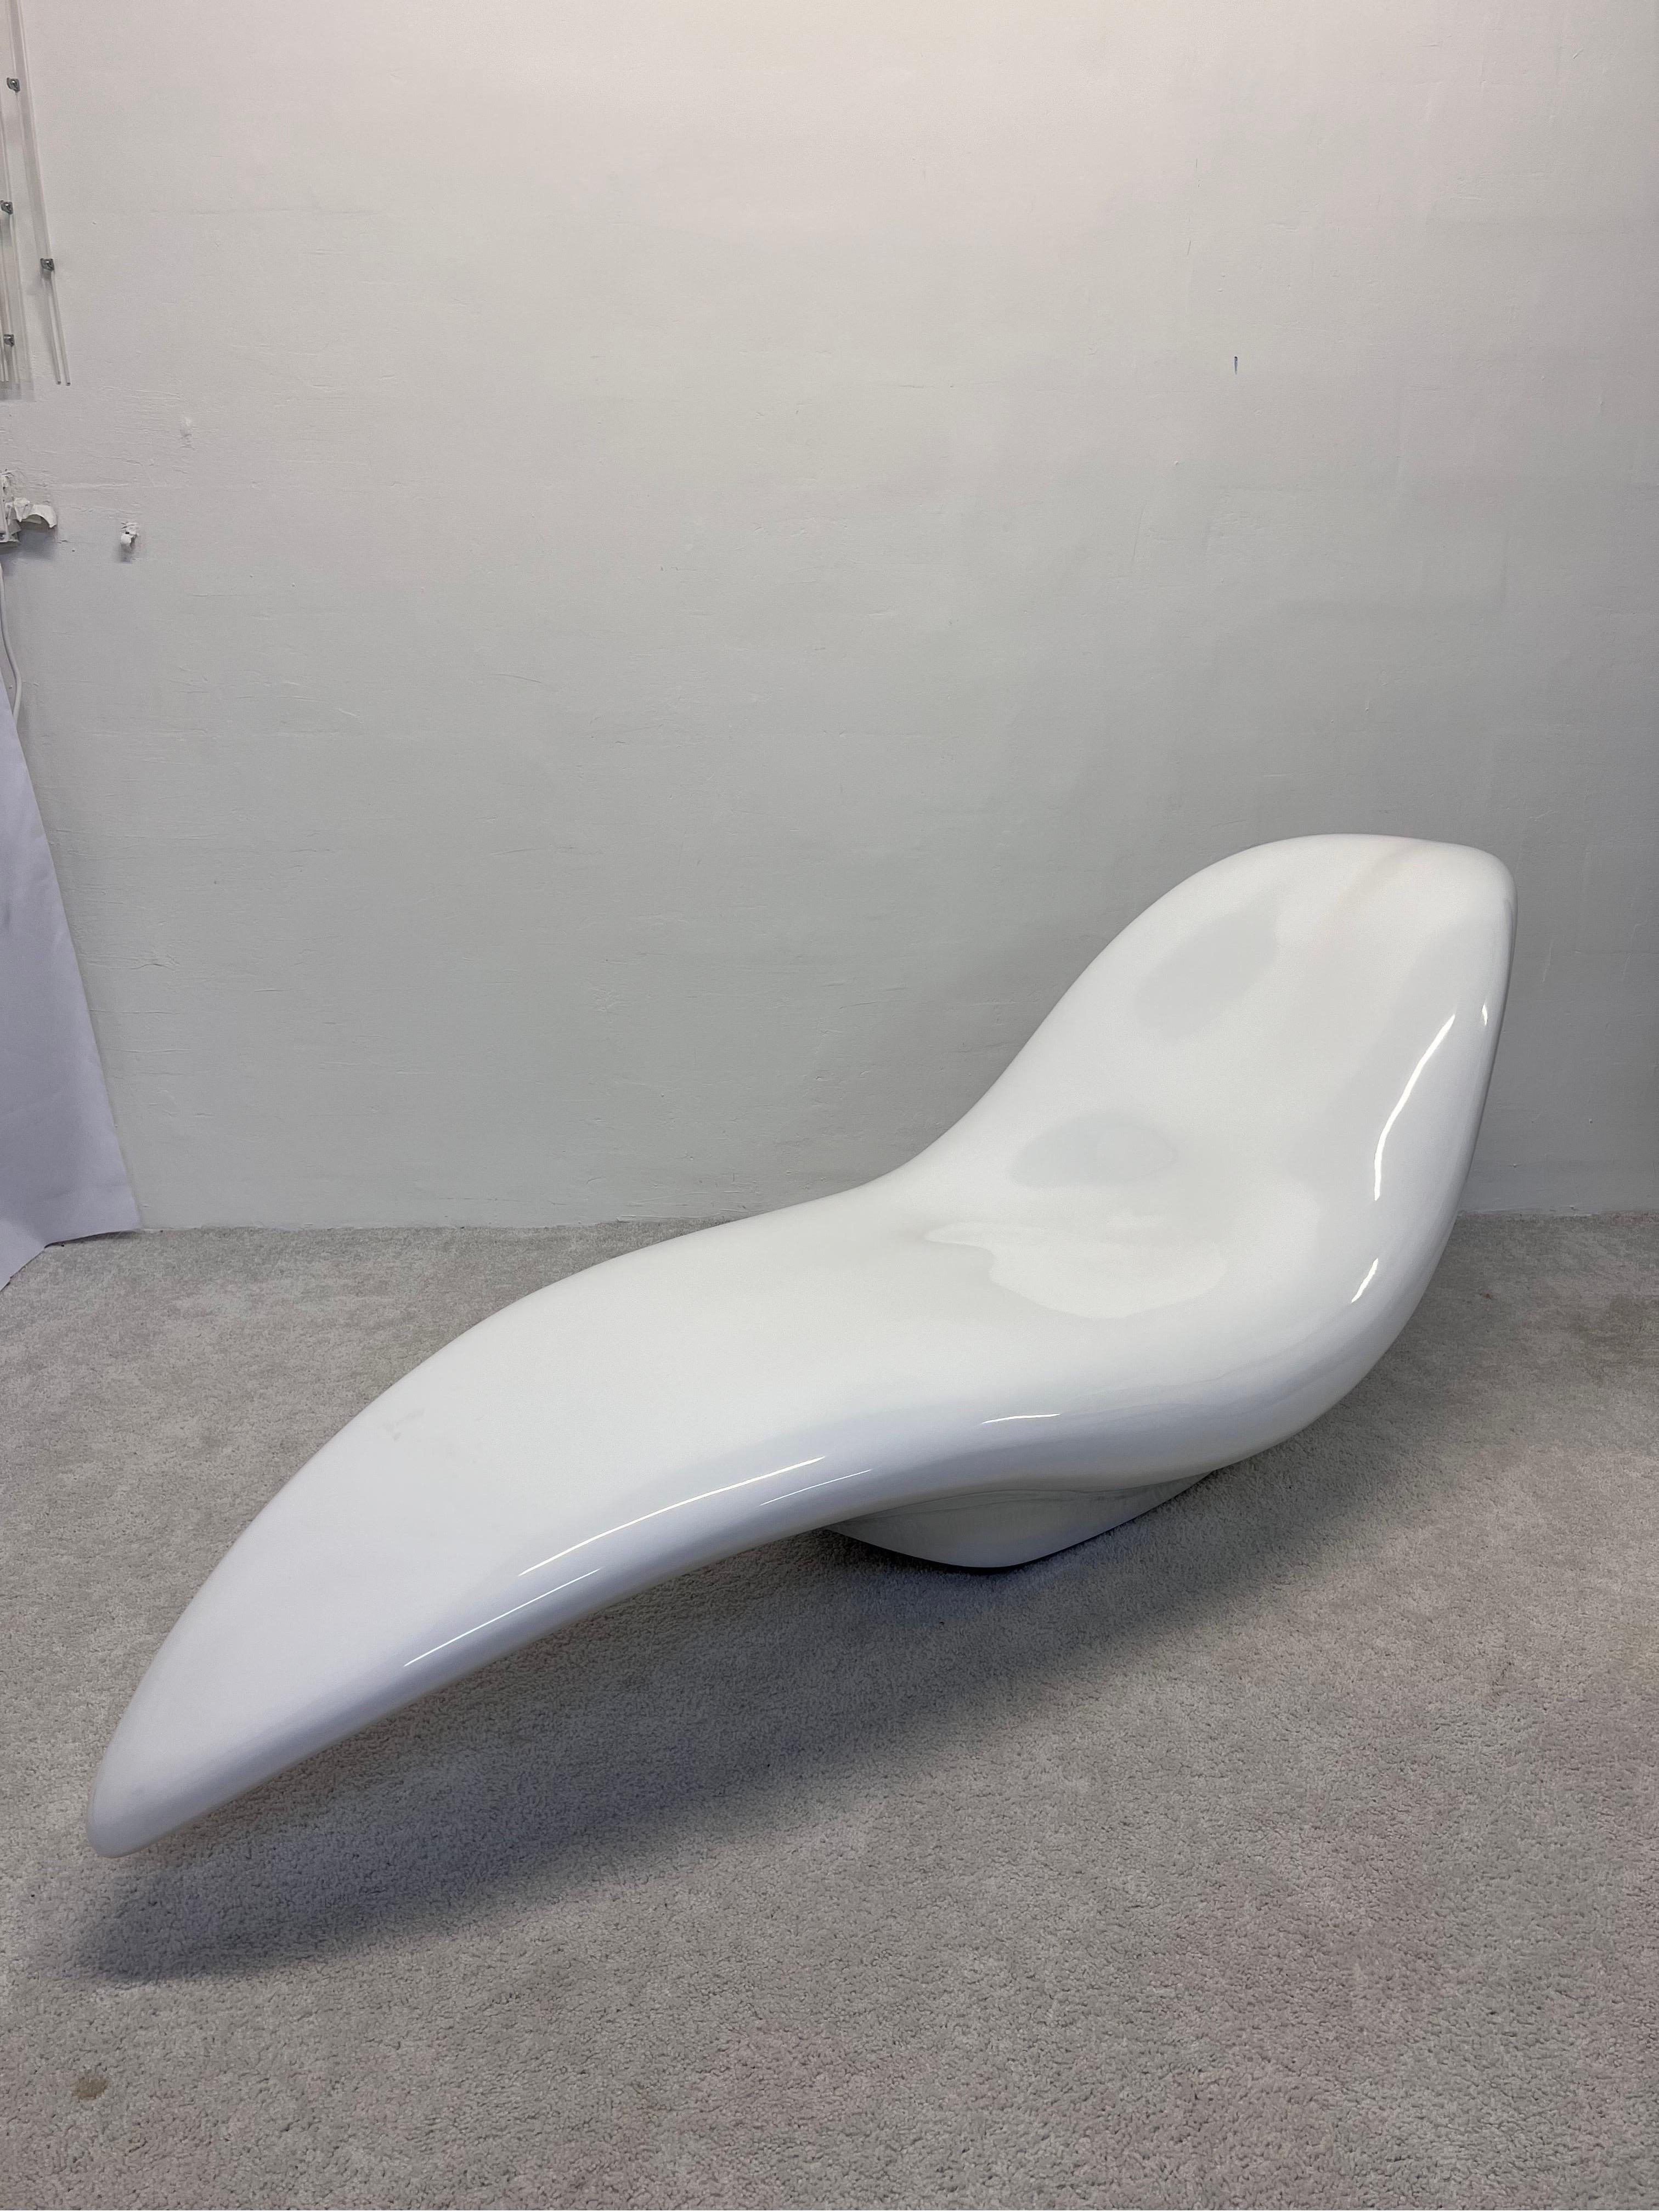 CedriMartini Ghost chaise in lacquered gloss white.

Ghost Chaise Longue by CedriMartini features a modern Italian design. This swinging chaise longue is characterized by a fluid and organic shape that gives it a futuristic and ergonomic look. Made